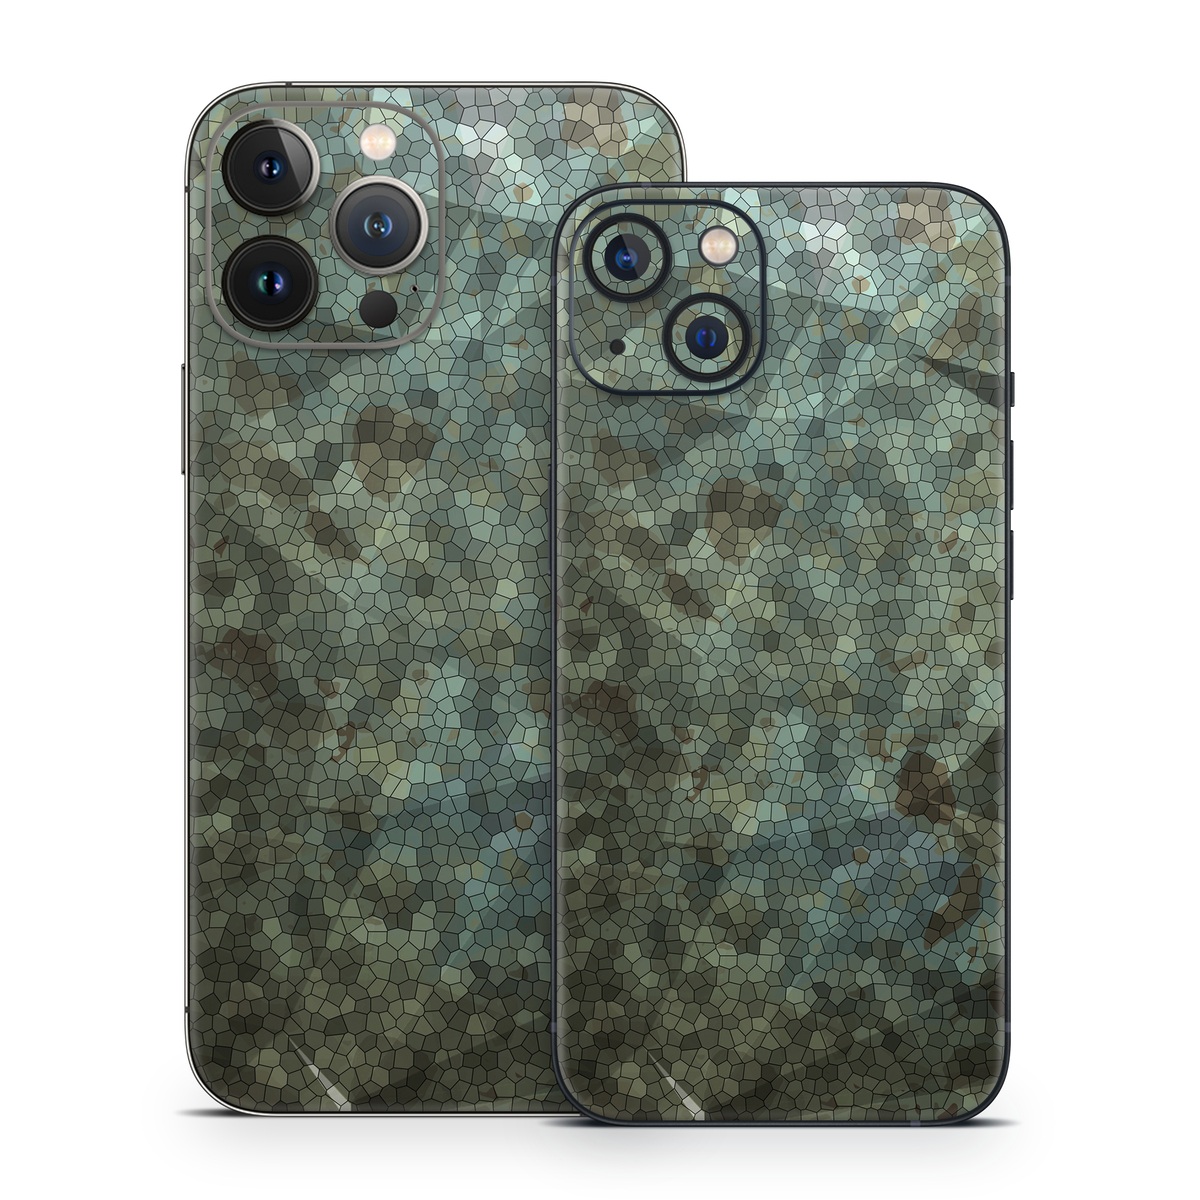 iPhone 13 Series Skin design of Green, Pattern, Brown, Wall, Design, Rock, Geology, Camouflage, Granite, Metal, with black, brown, blue, gray, white colors